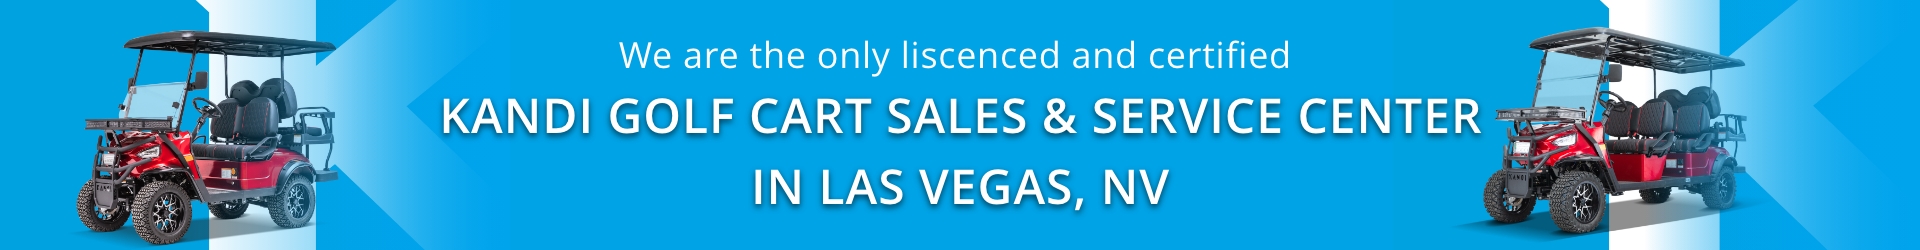 We are the only liscenced and certified Kandi Golf Cart Sales & Service Center in Las Vegas, NV